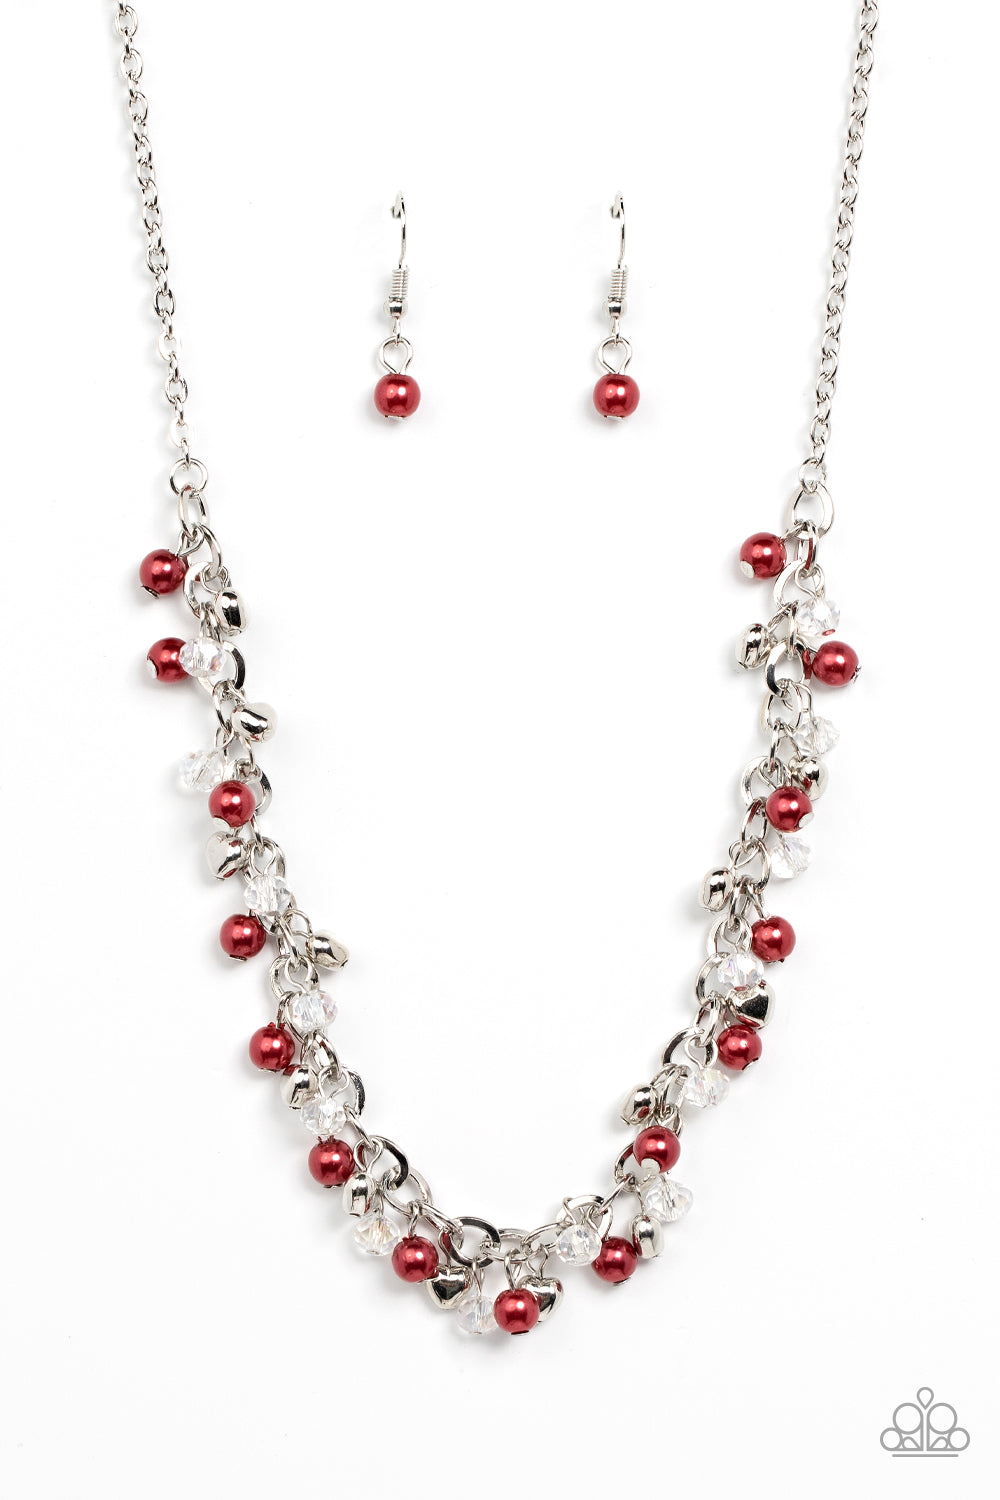 SOFT HEARTED SHIMMER RED-NECKLACE